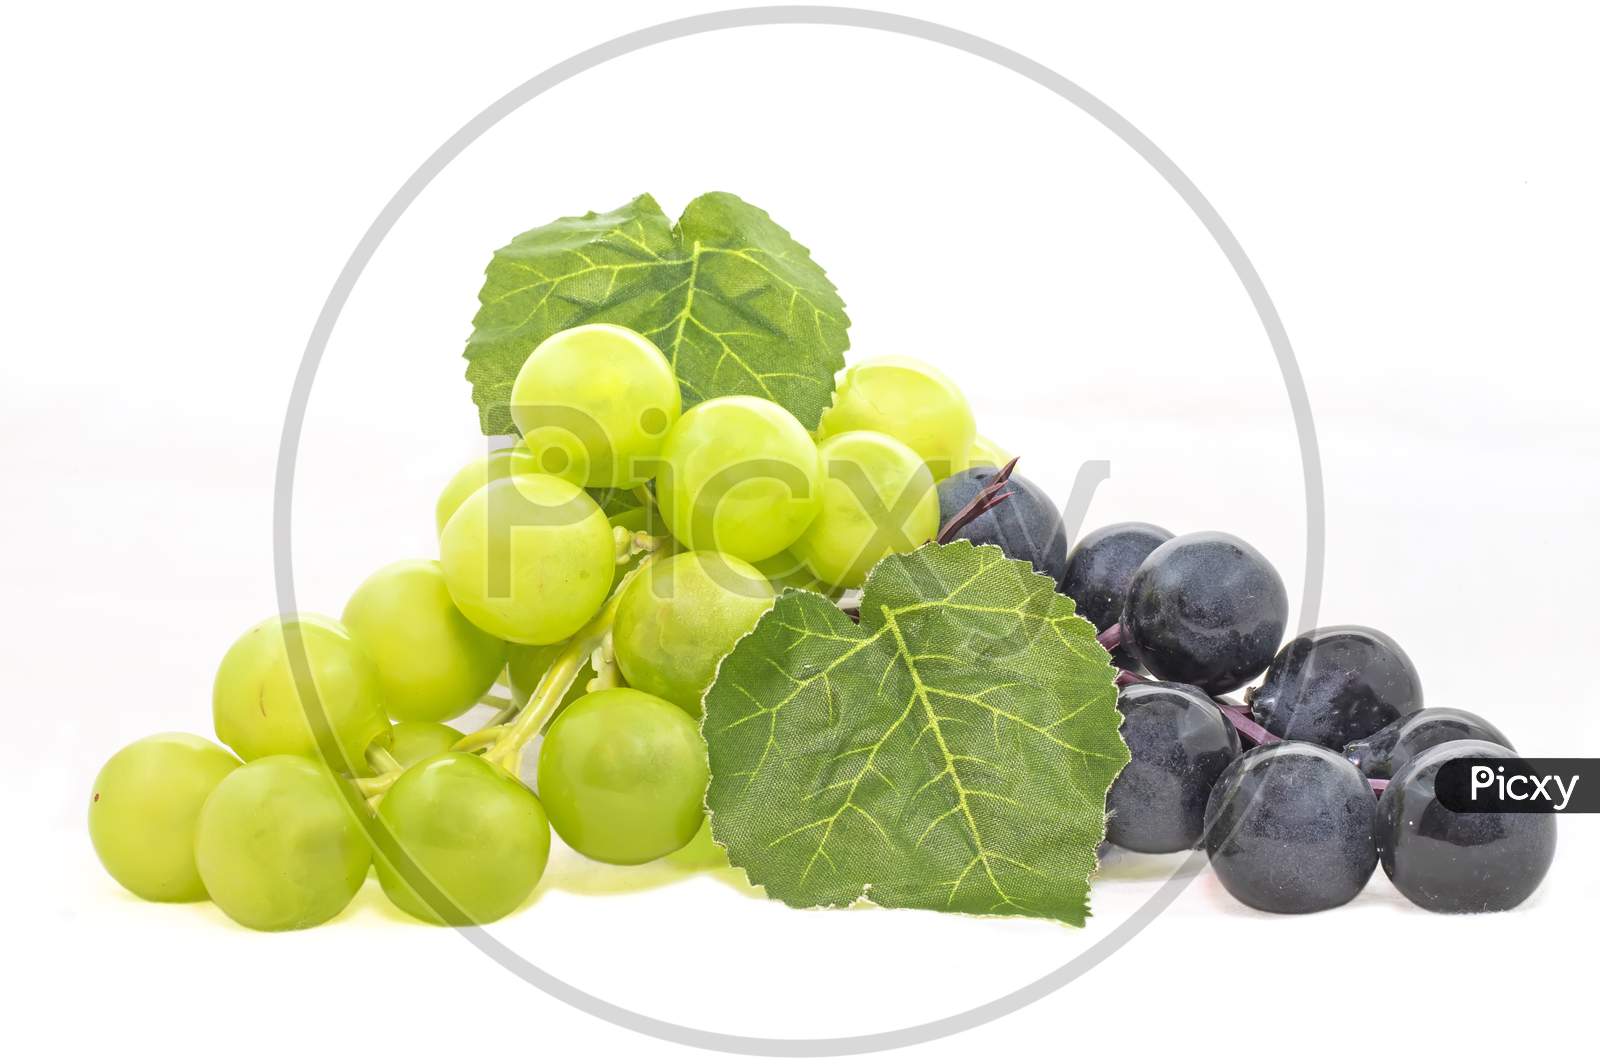 Bunch Of Black Grape With Green Seedless Grape Isolated On White Background.